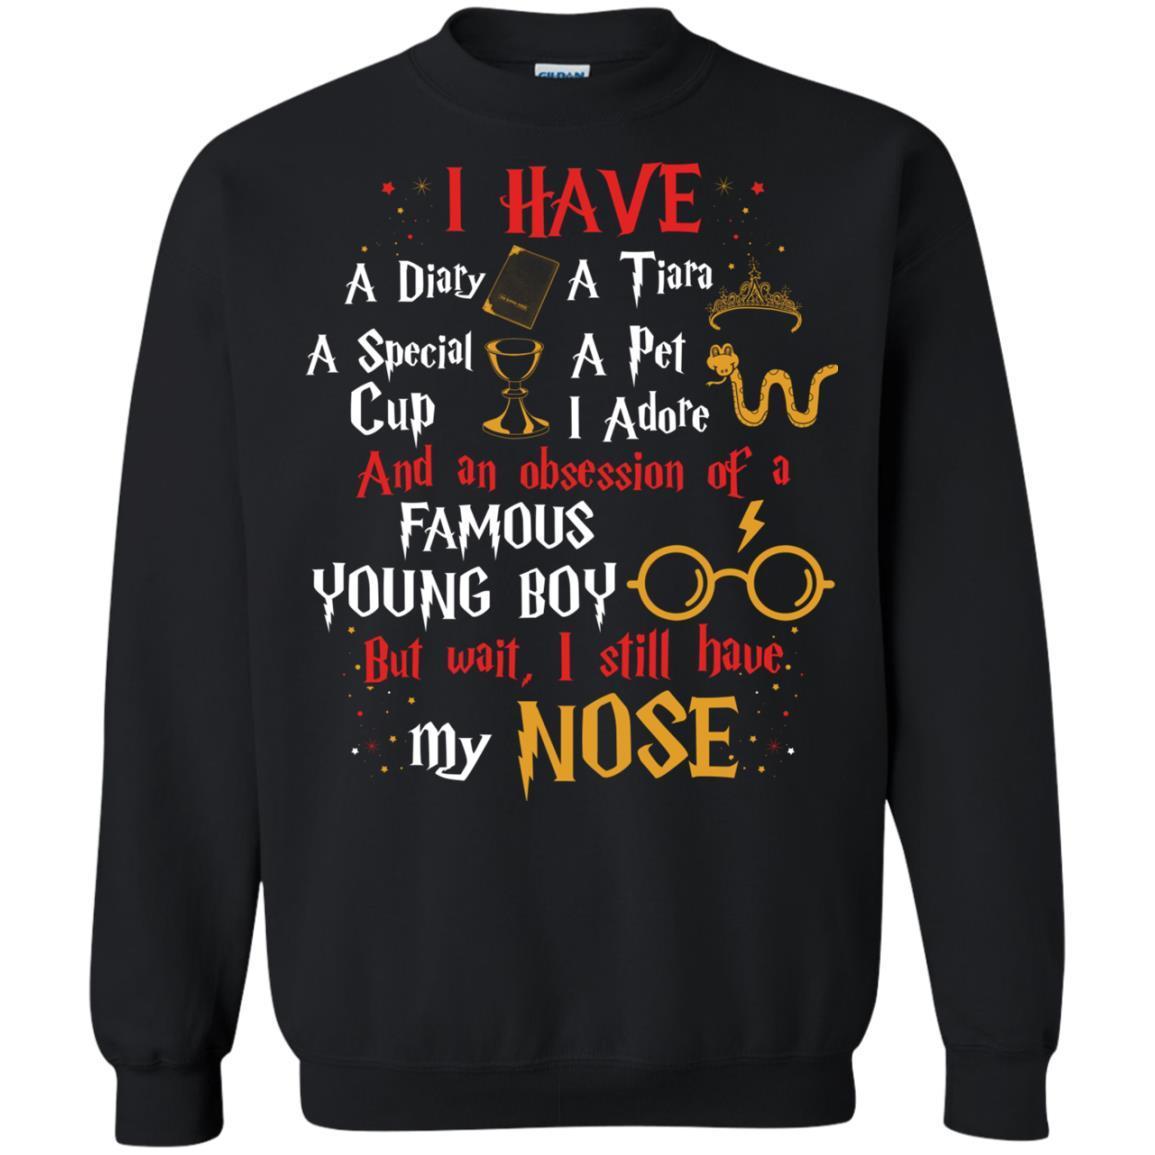 I Have A Diary, A Tiara, A Special Cup, A Pet I Adore And An Obsession Of A Famous Young Boy Harry Potter Fan T-shirt Black S 